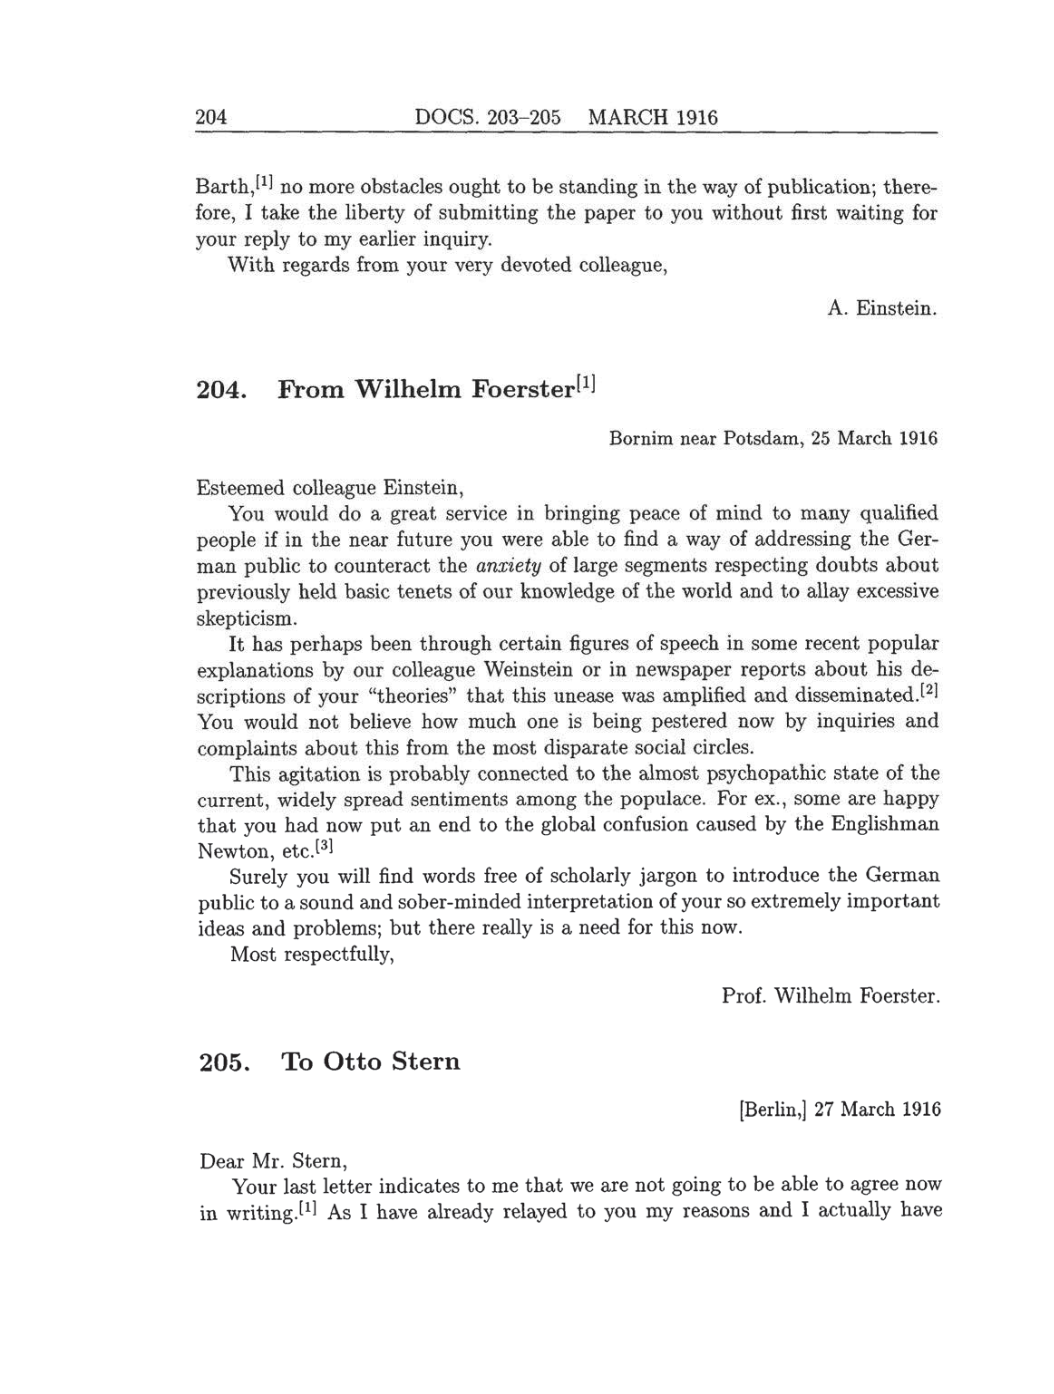 Volume 8: The Berlin Years: Correspondence, 1914-1918 (English translation supplement) page 204